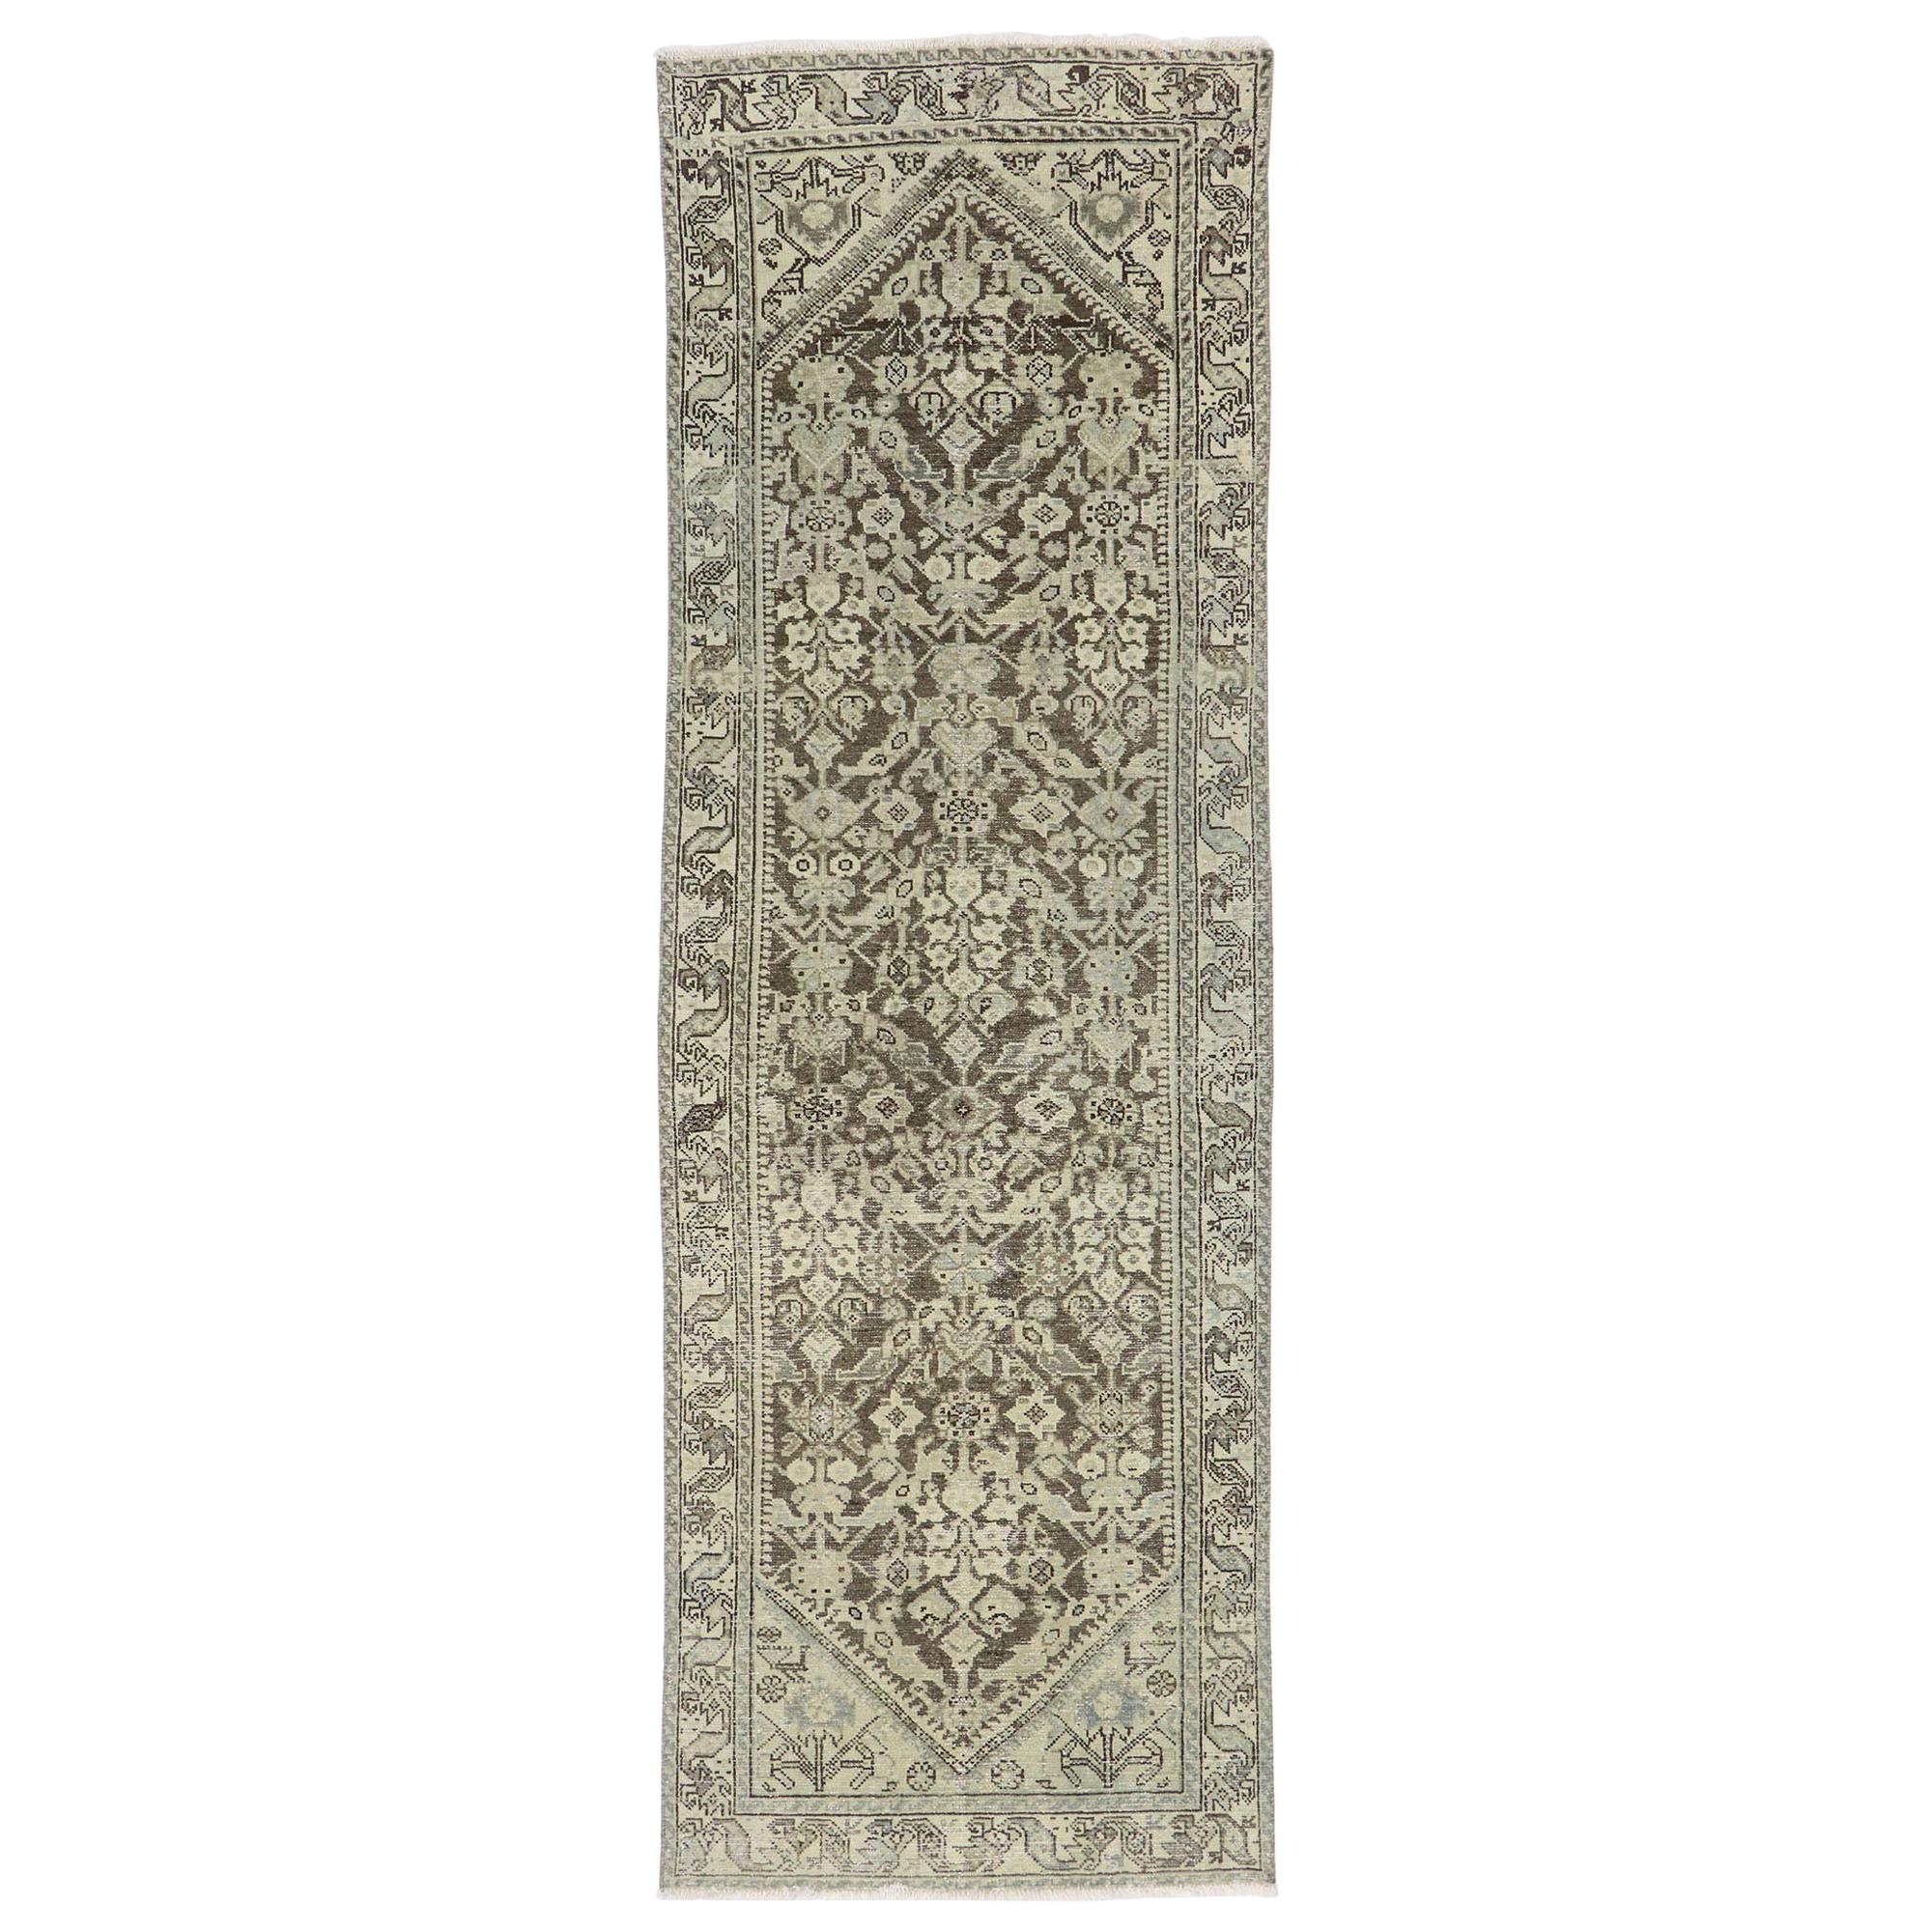 Distressed Antique Persian Mahal Runner with Modern Rustic Artisan Style For Sale